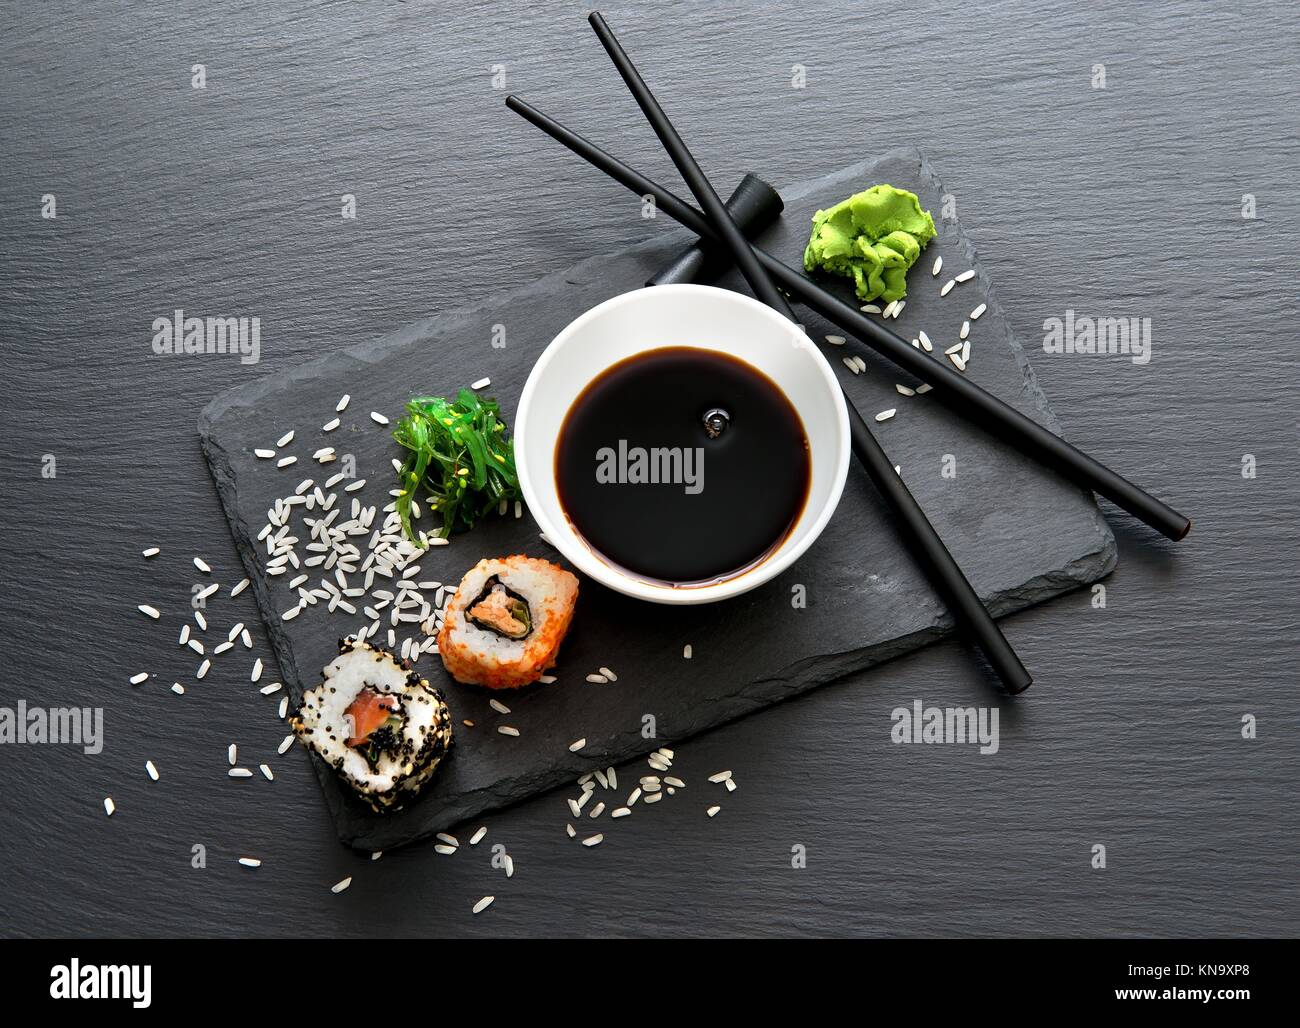 Rolls with sauce and chopsticks on a slate table. Stock Photo